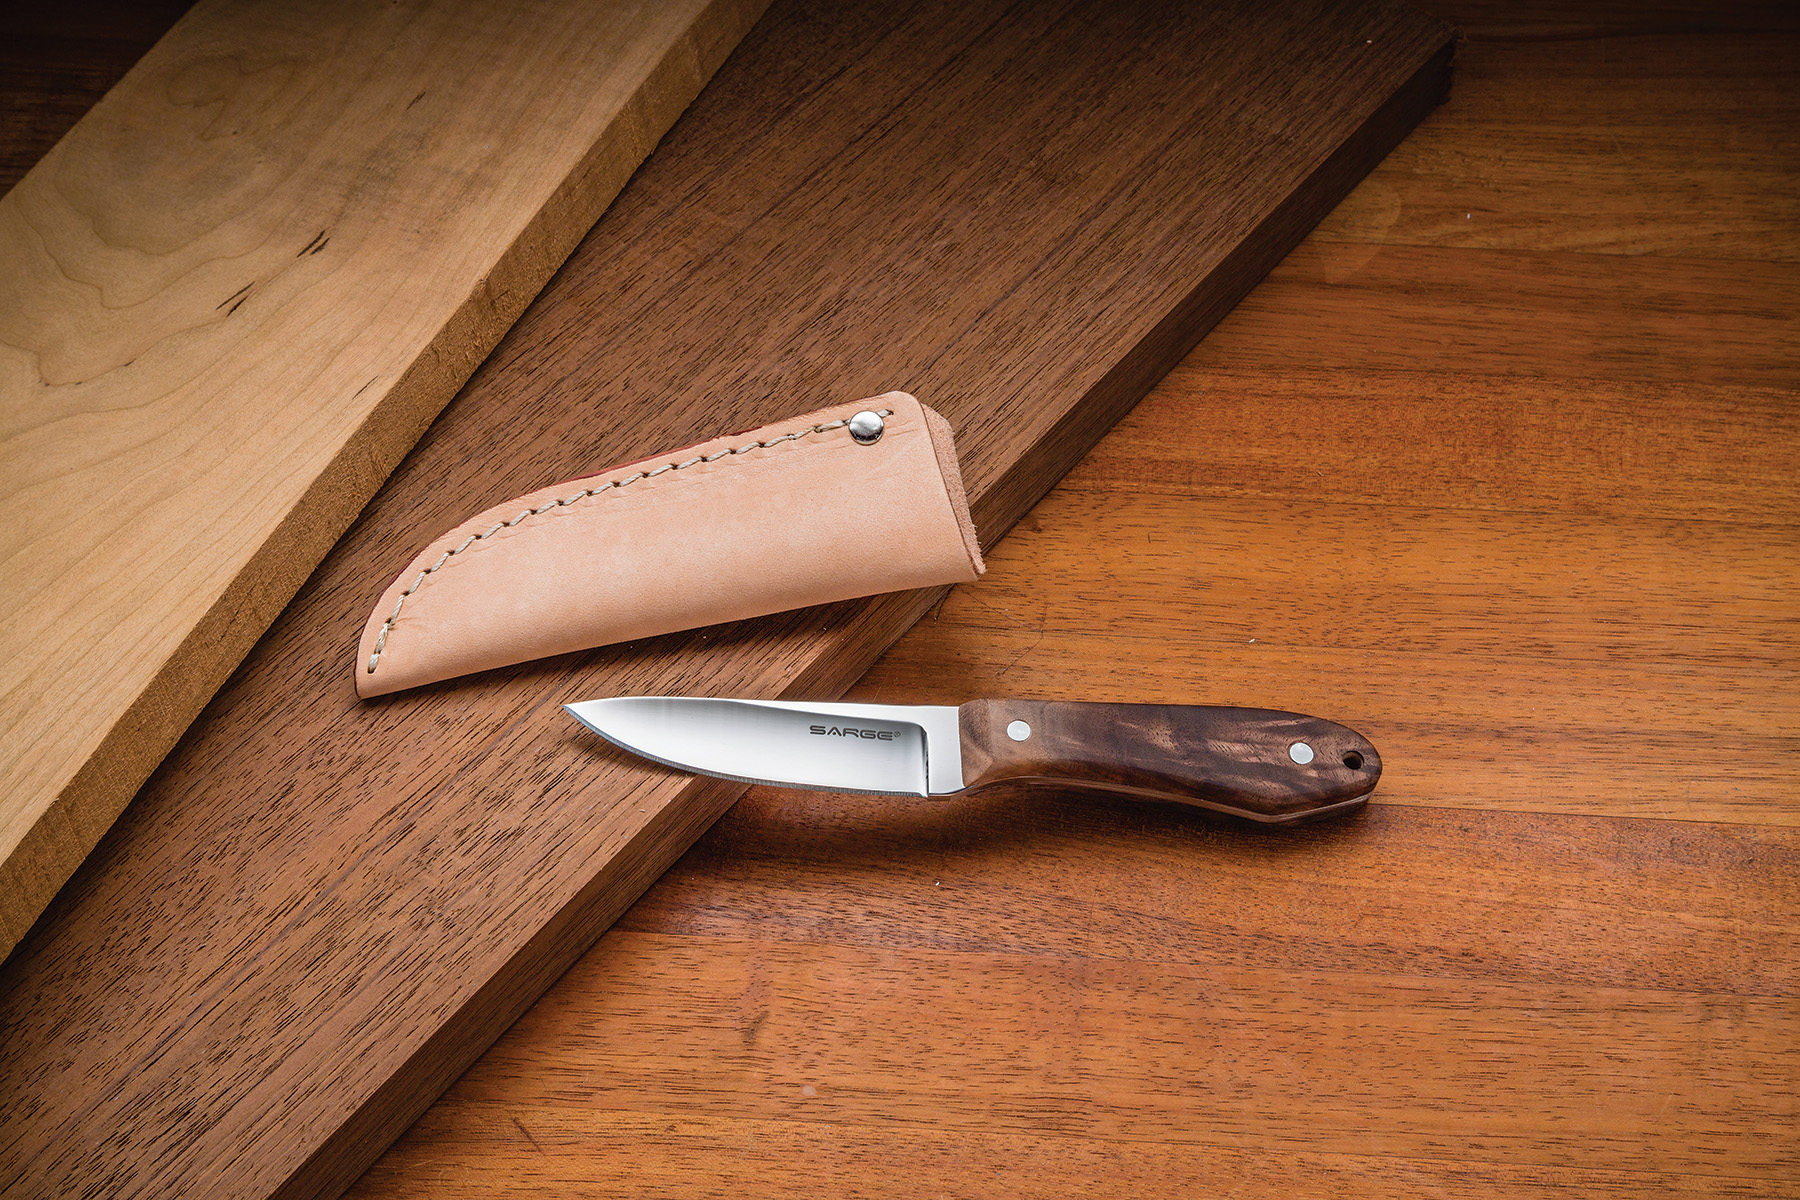 In the Custom Knife class, you will choose wood scales for the handle, then learn how to sand, shape and finish.